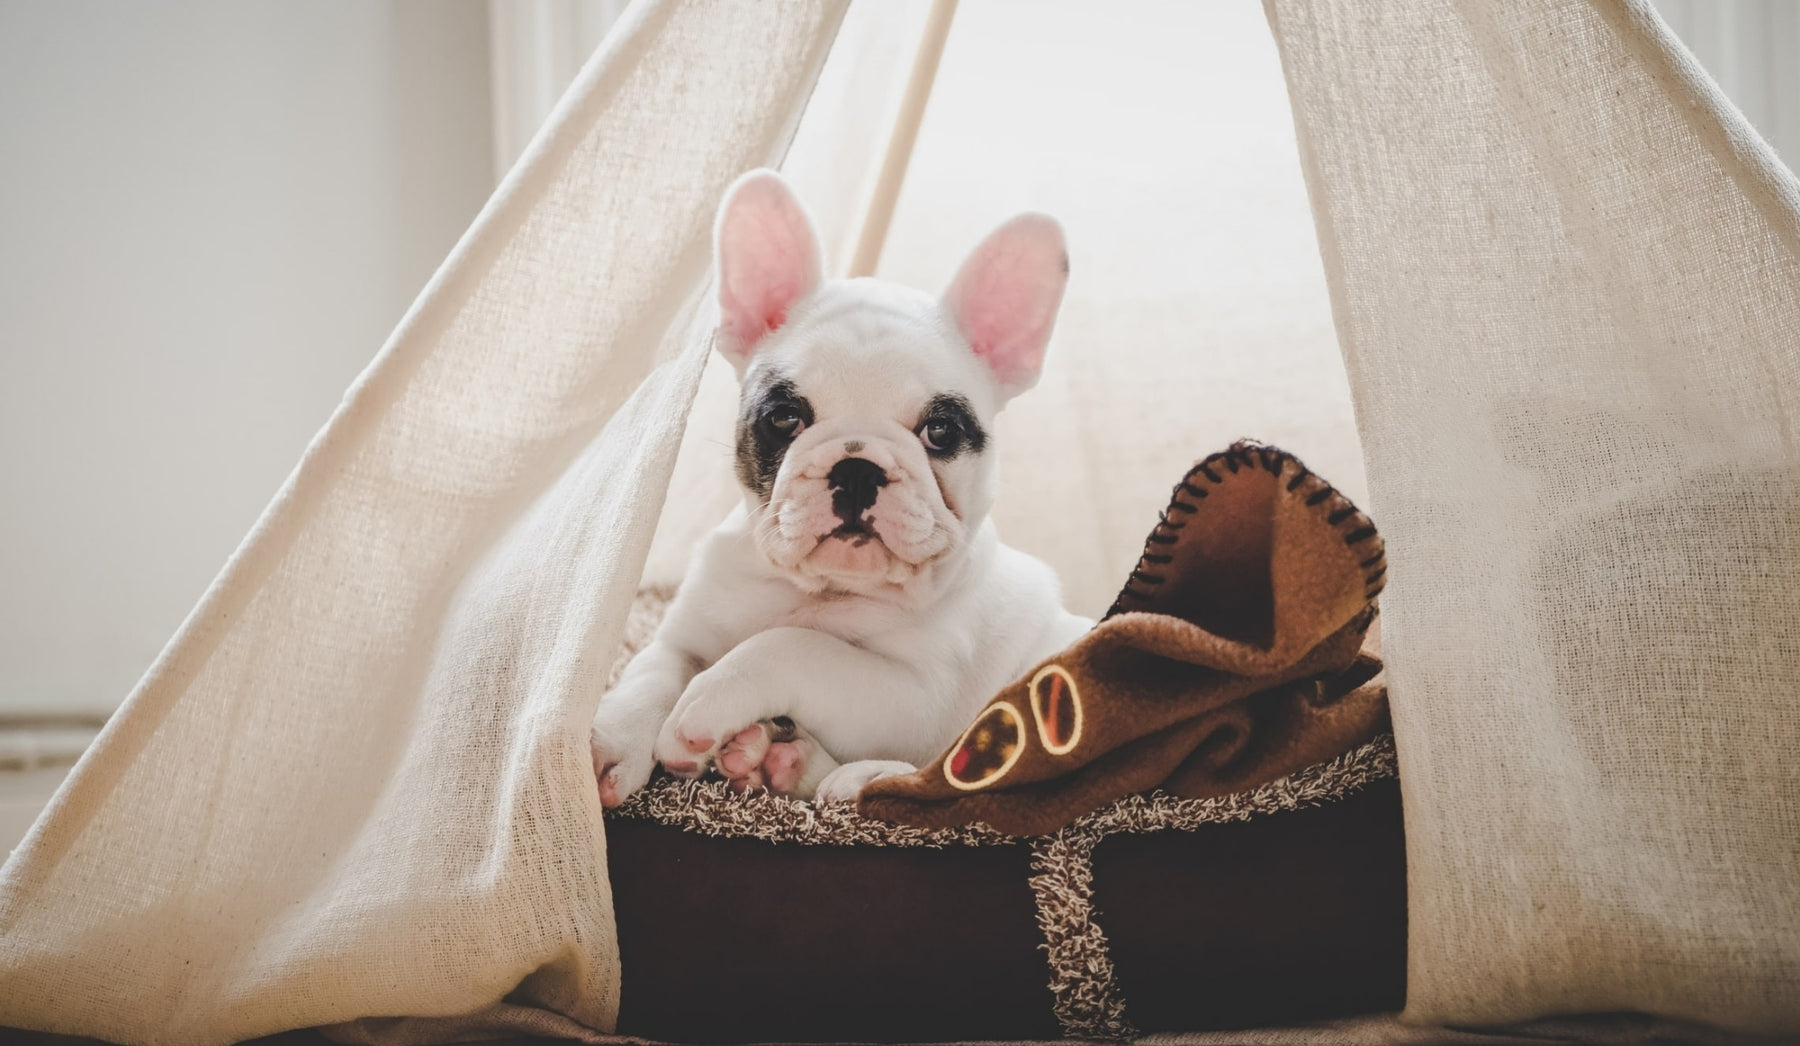 French Bulldog relaxing in a Dog Teepee from Estilo Living - Buy Pet Teepees Online & Other Pet Accessories